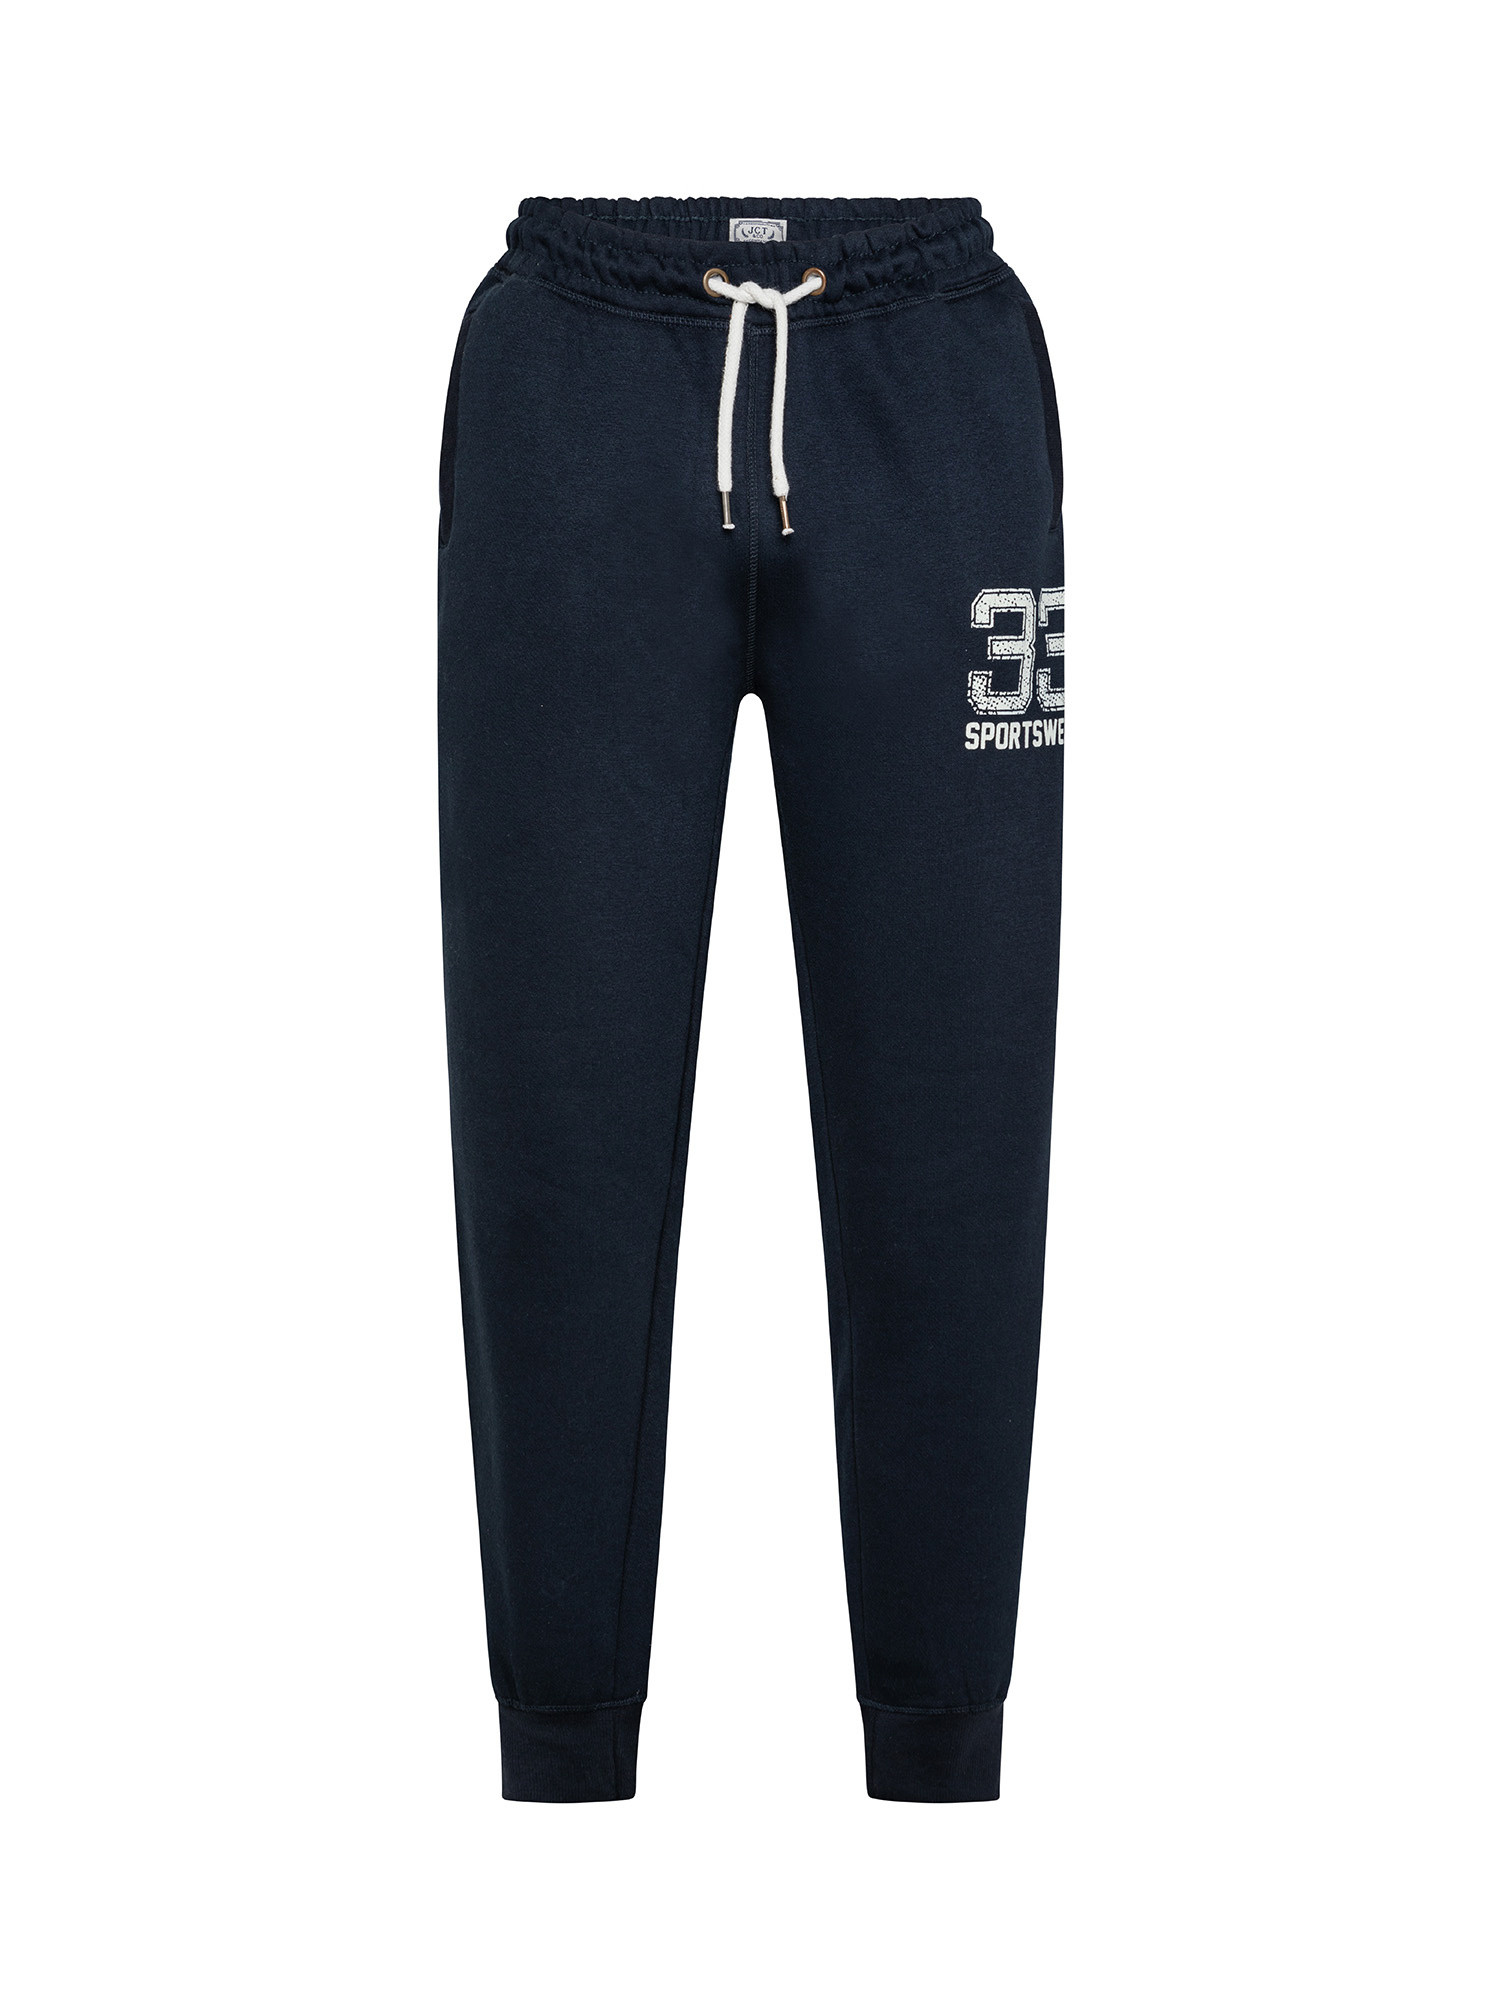 JCT - Trousers with print, Dark Blue, large image number 0